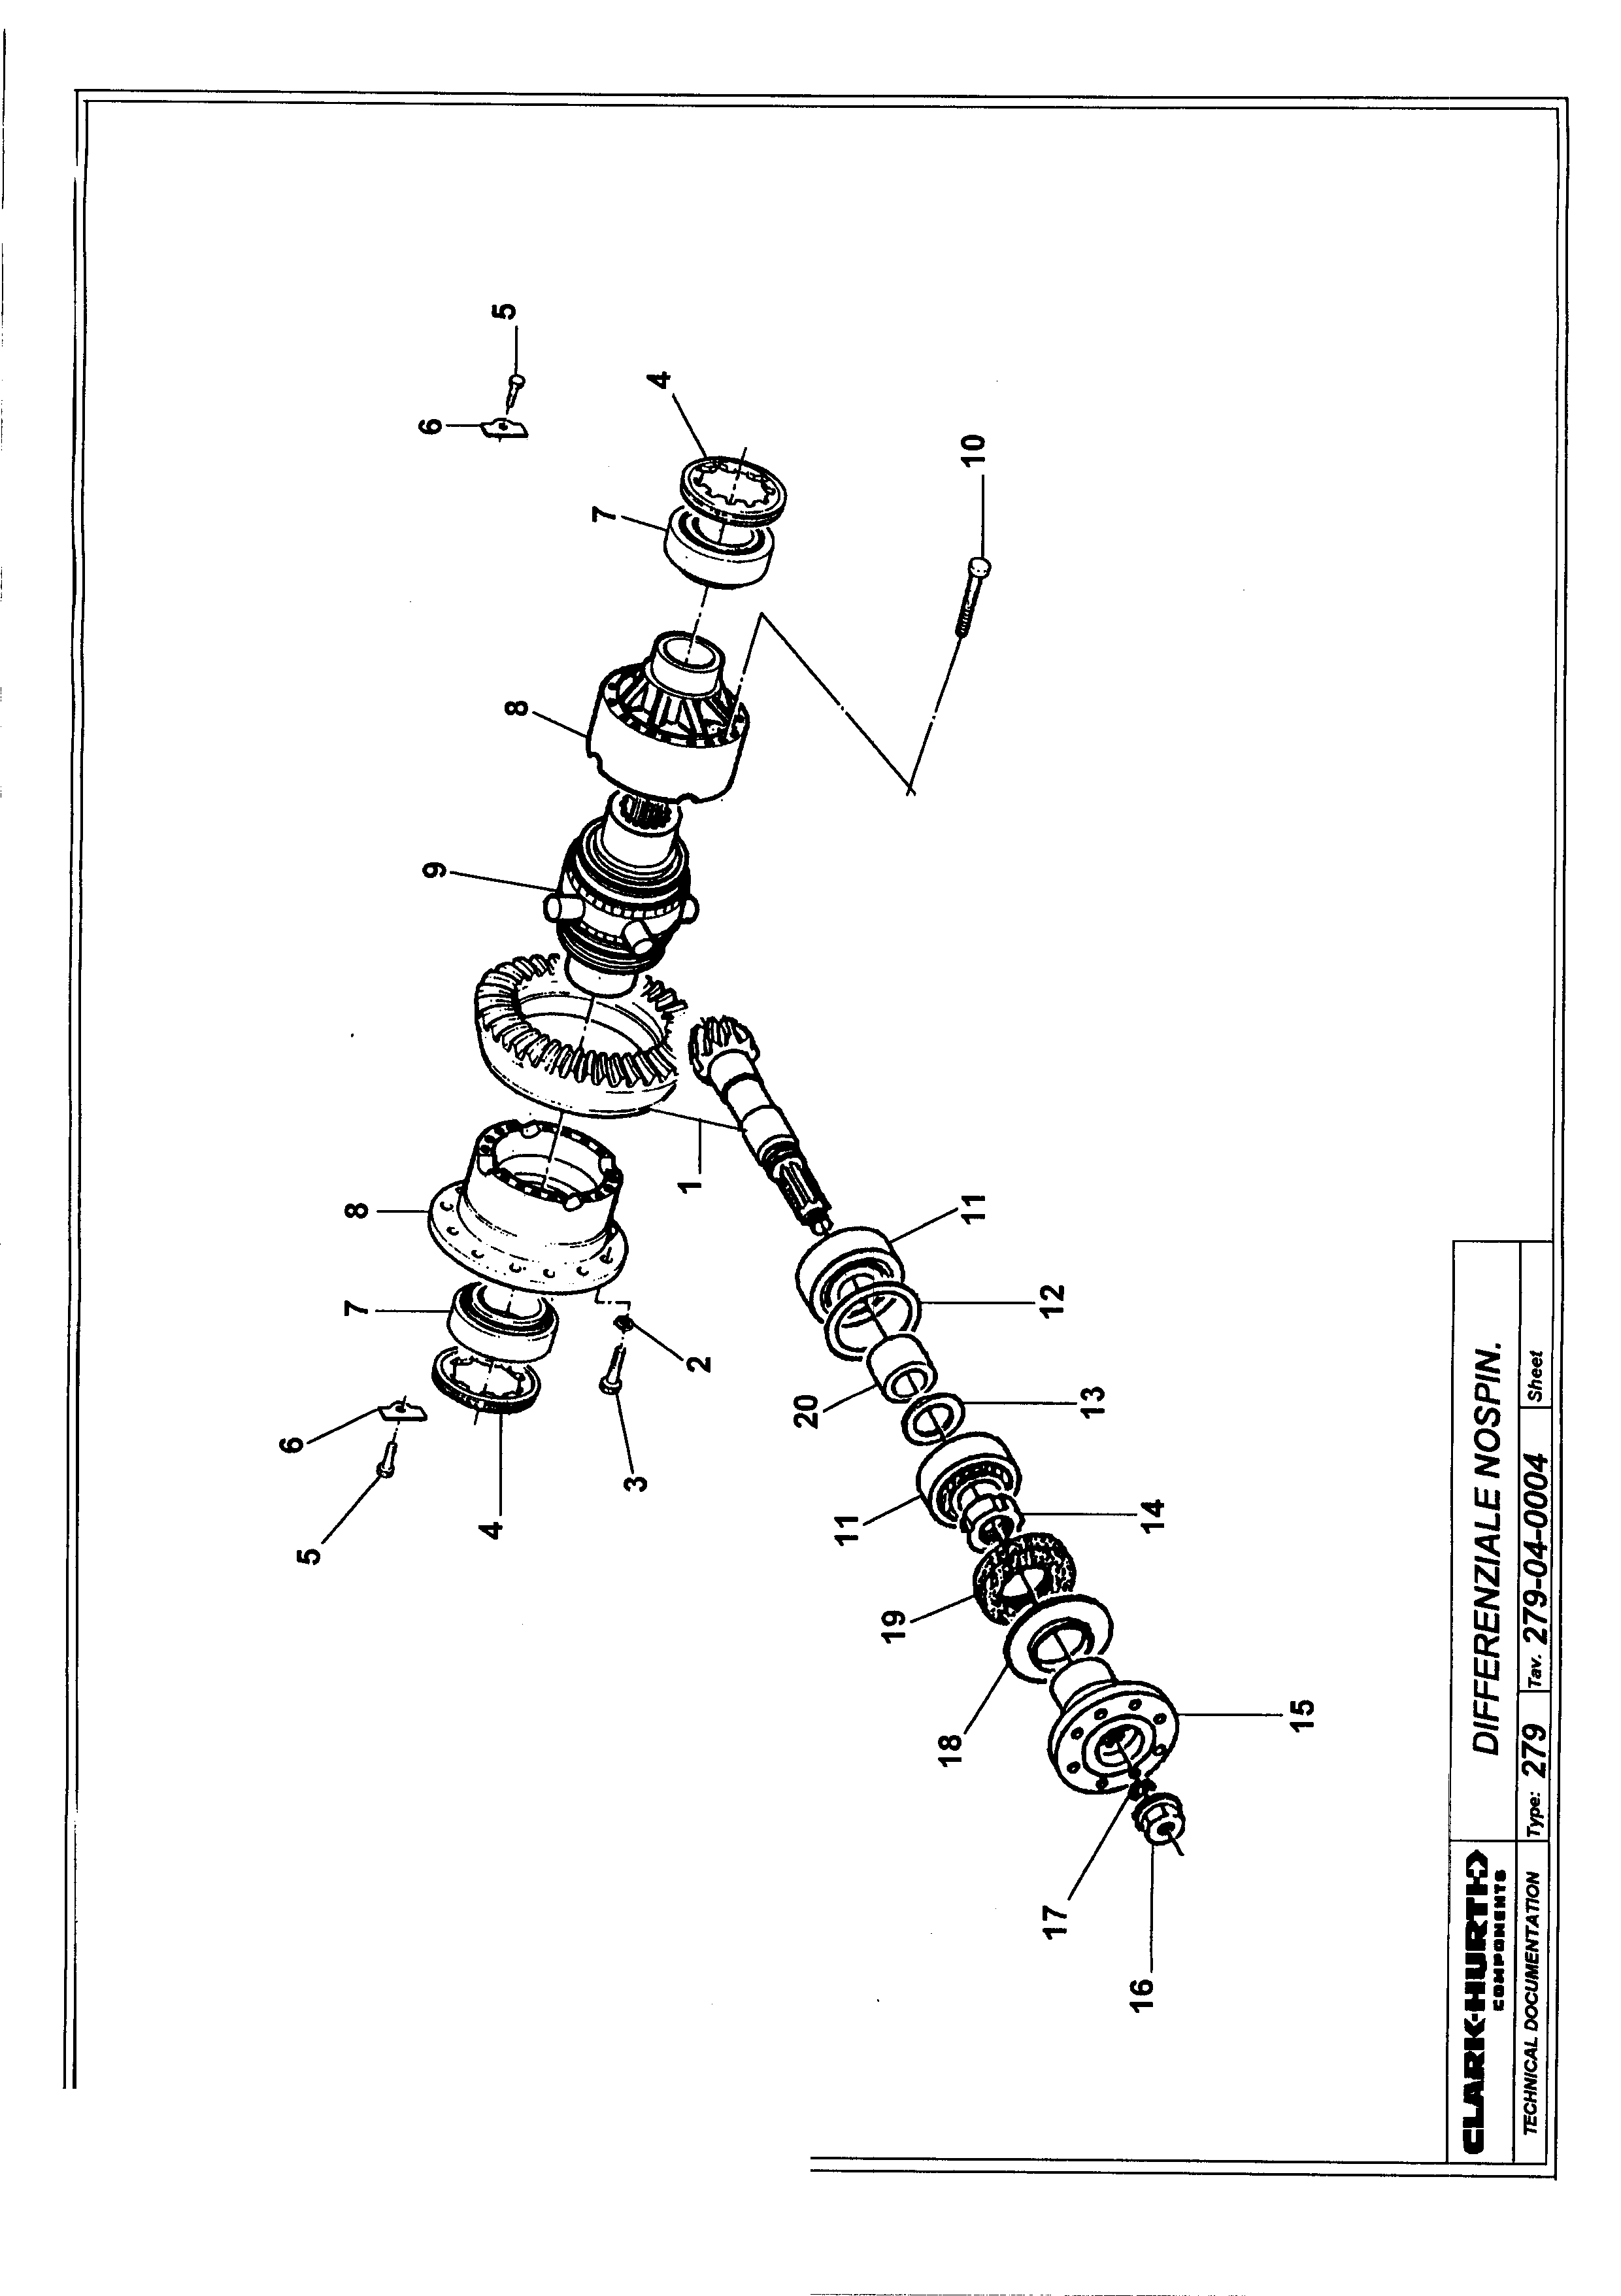 drawing for SHUTTLELIFT 1002175 - NOSPIN DIFFERENTIAL (figure 4)